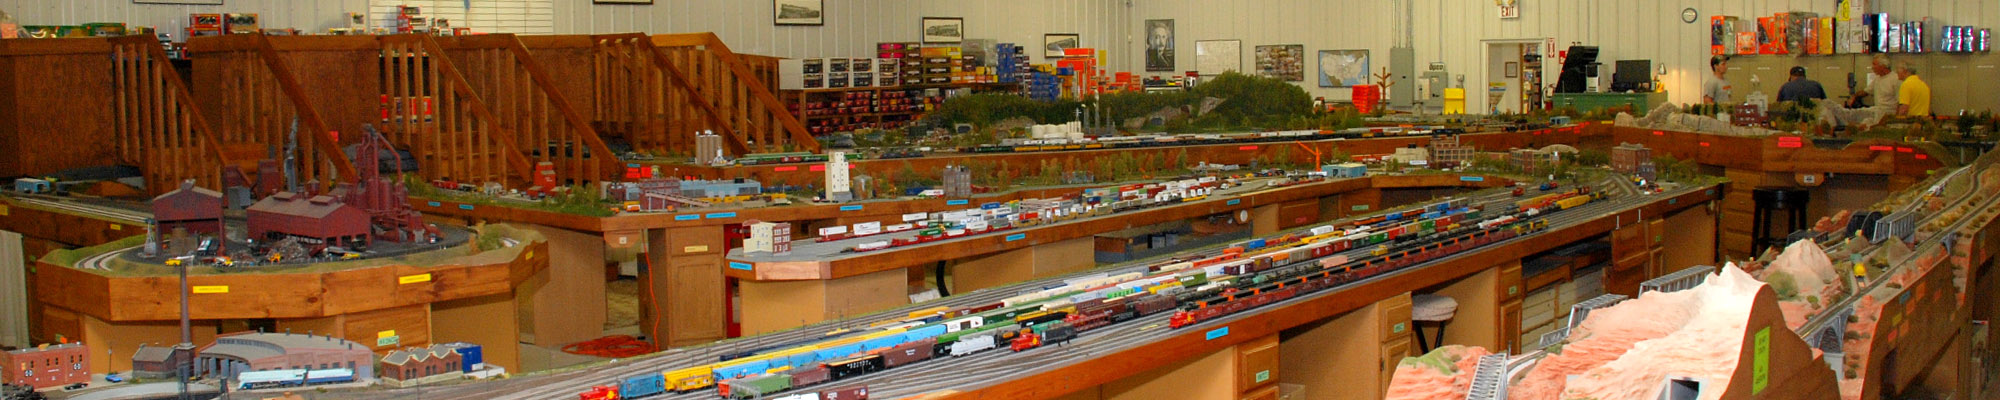 K-10 Model Trains, RC Model Airplanes, RC Cars & Hobby Shop in Maryville, IL